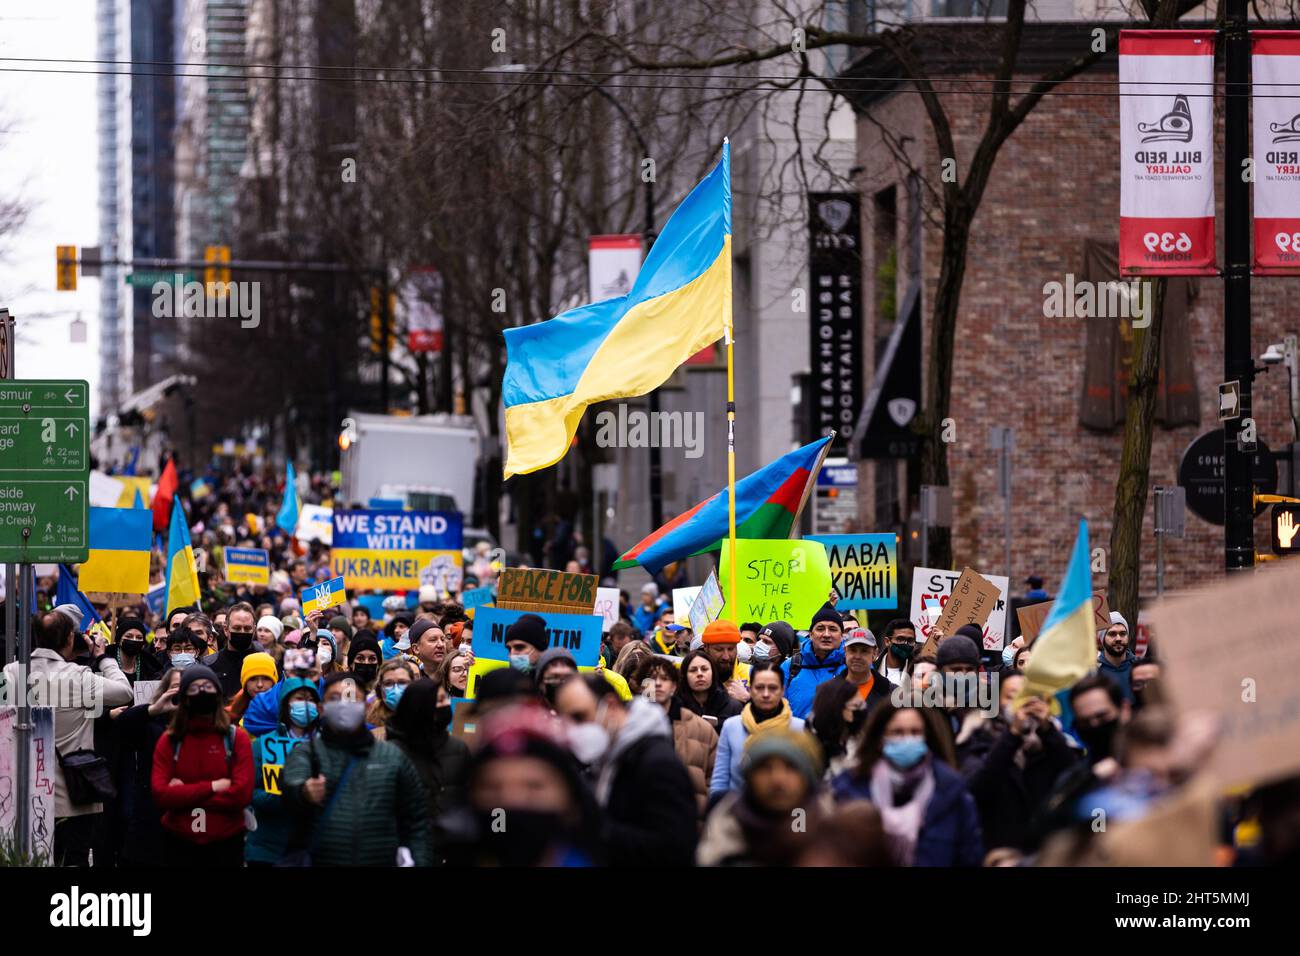 DOWNTOWN VANCOUVER, BC, CANADA - FEB 26, 2022: Protest rally against Vladimir Putin and the Russian invasion of Ukraine that was attended by thousands Stock Photo